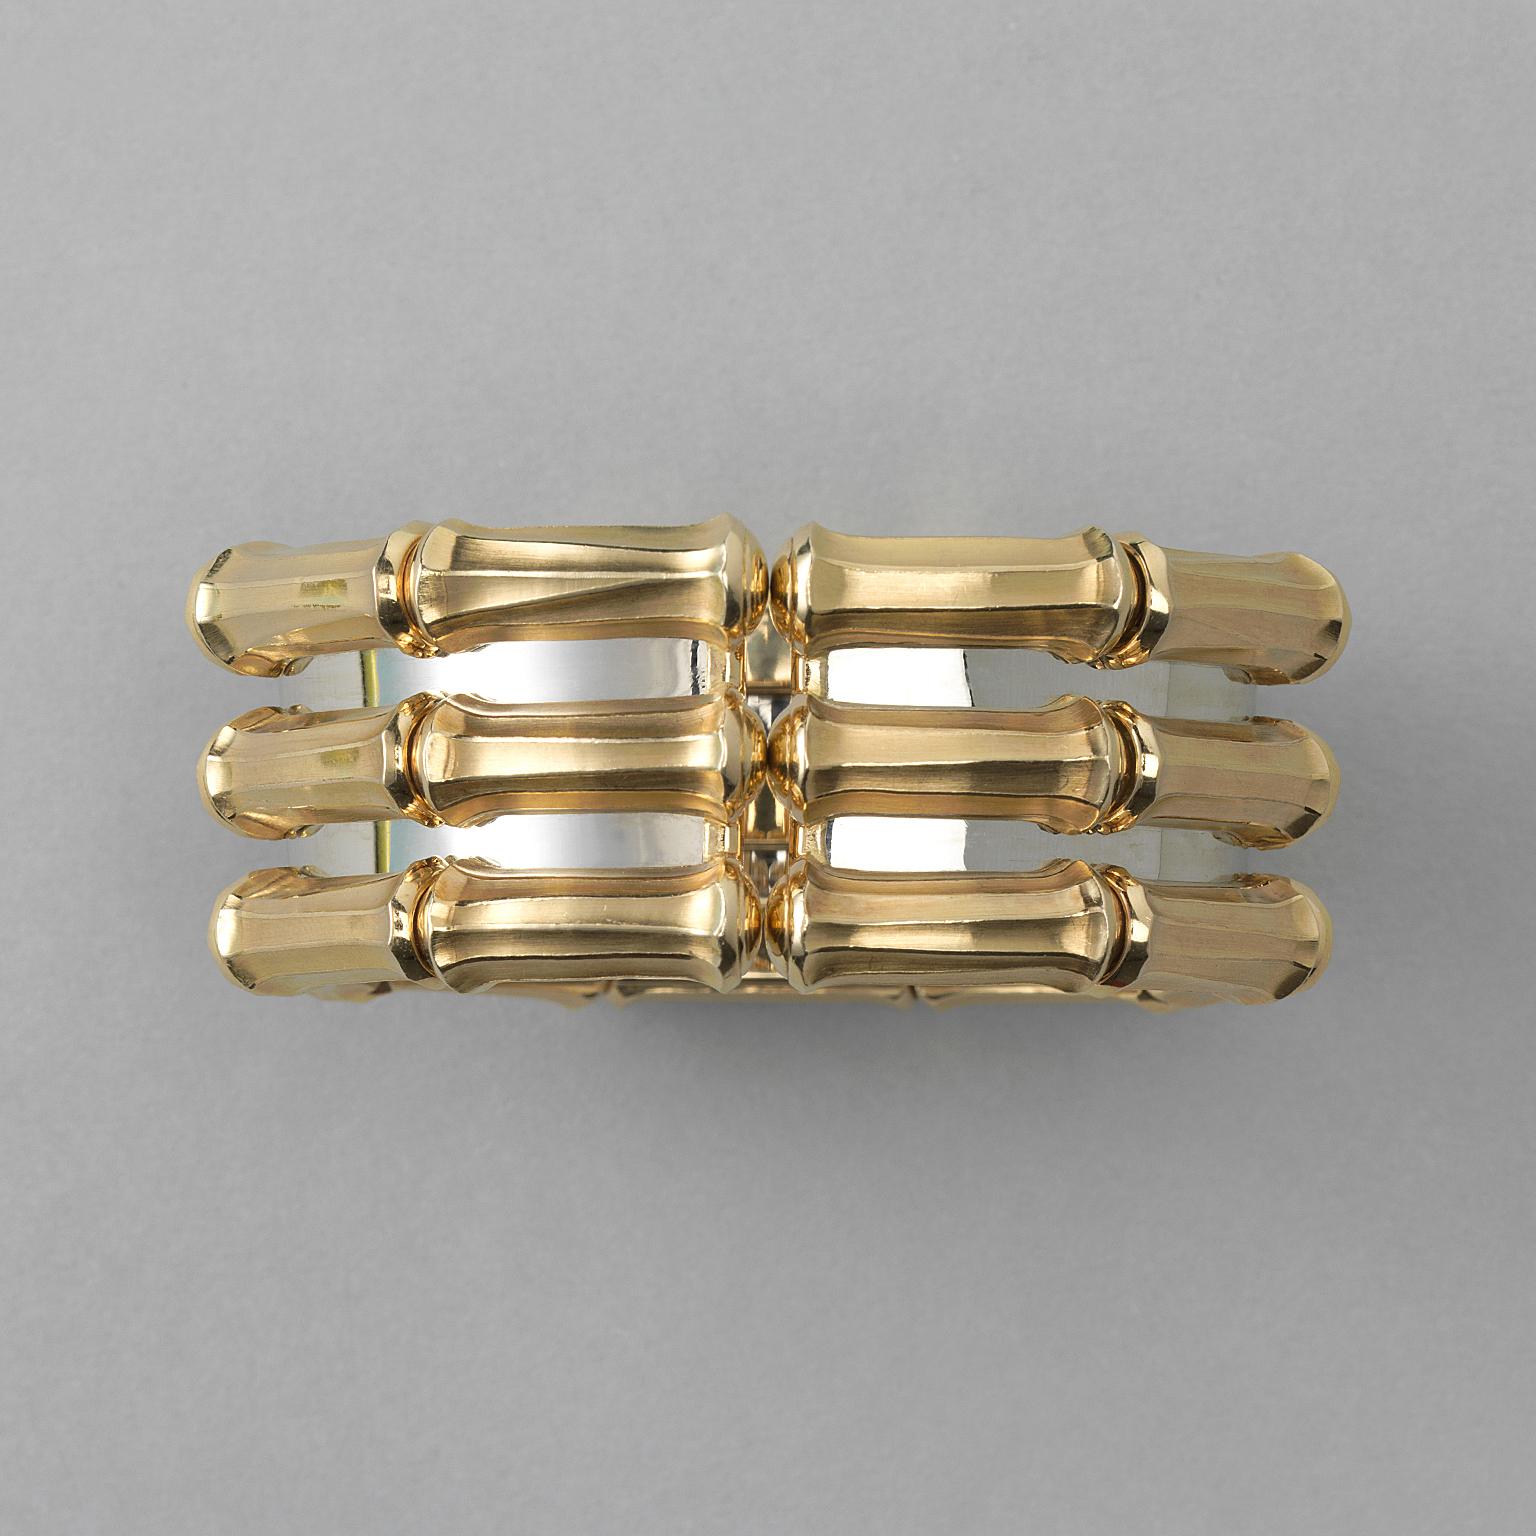 A vintage bi-color 18 carat gold cuff bangle designed as three rows of yellow gold bamboo motifs, held together by a white gold backing, signed and numbered: Cartier, 640927.

weight: 173.85 gram
size: 16-17 cm
width: 7.2 cm